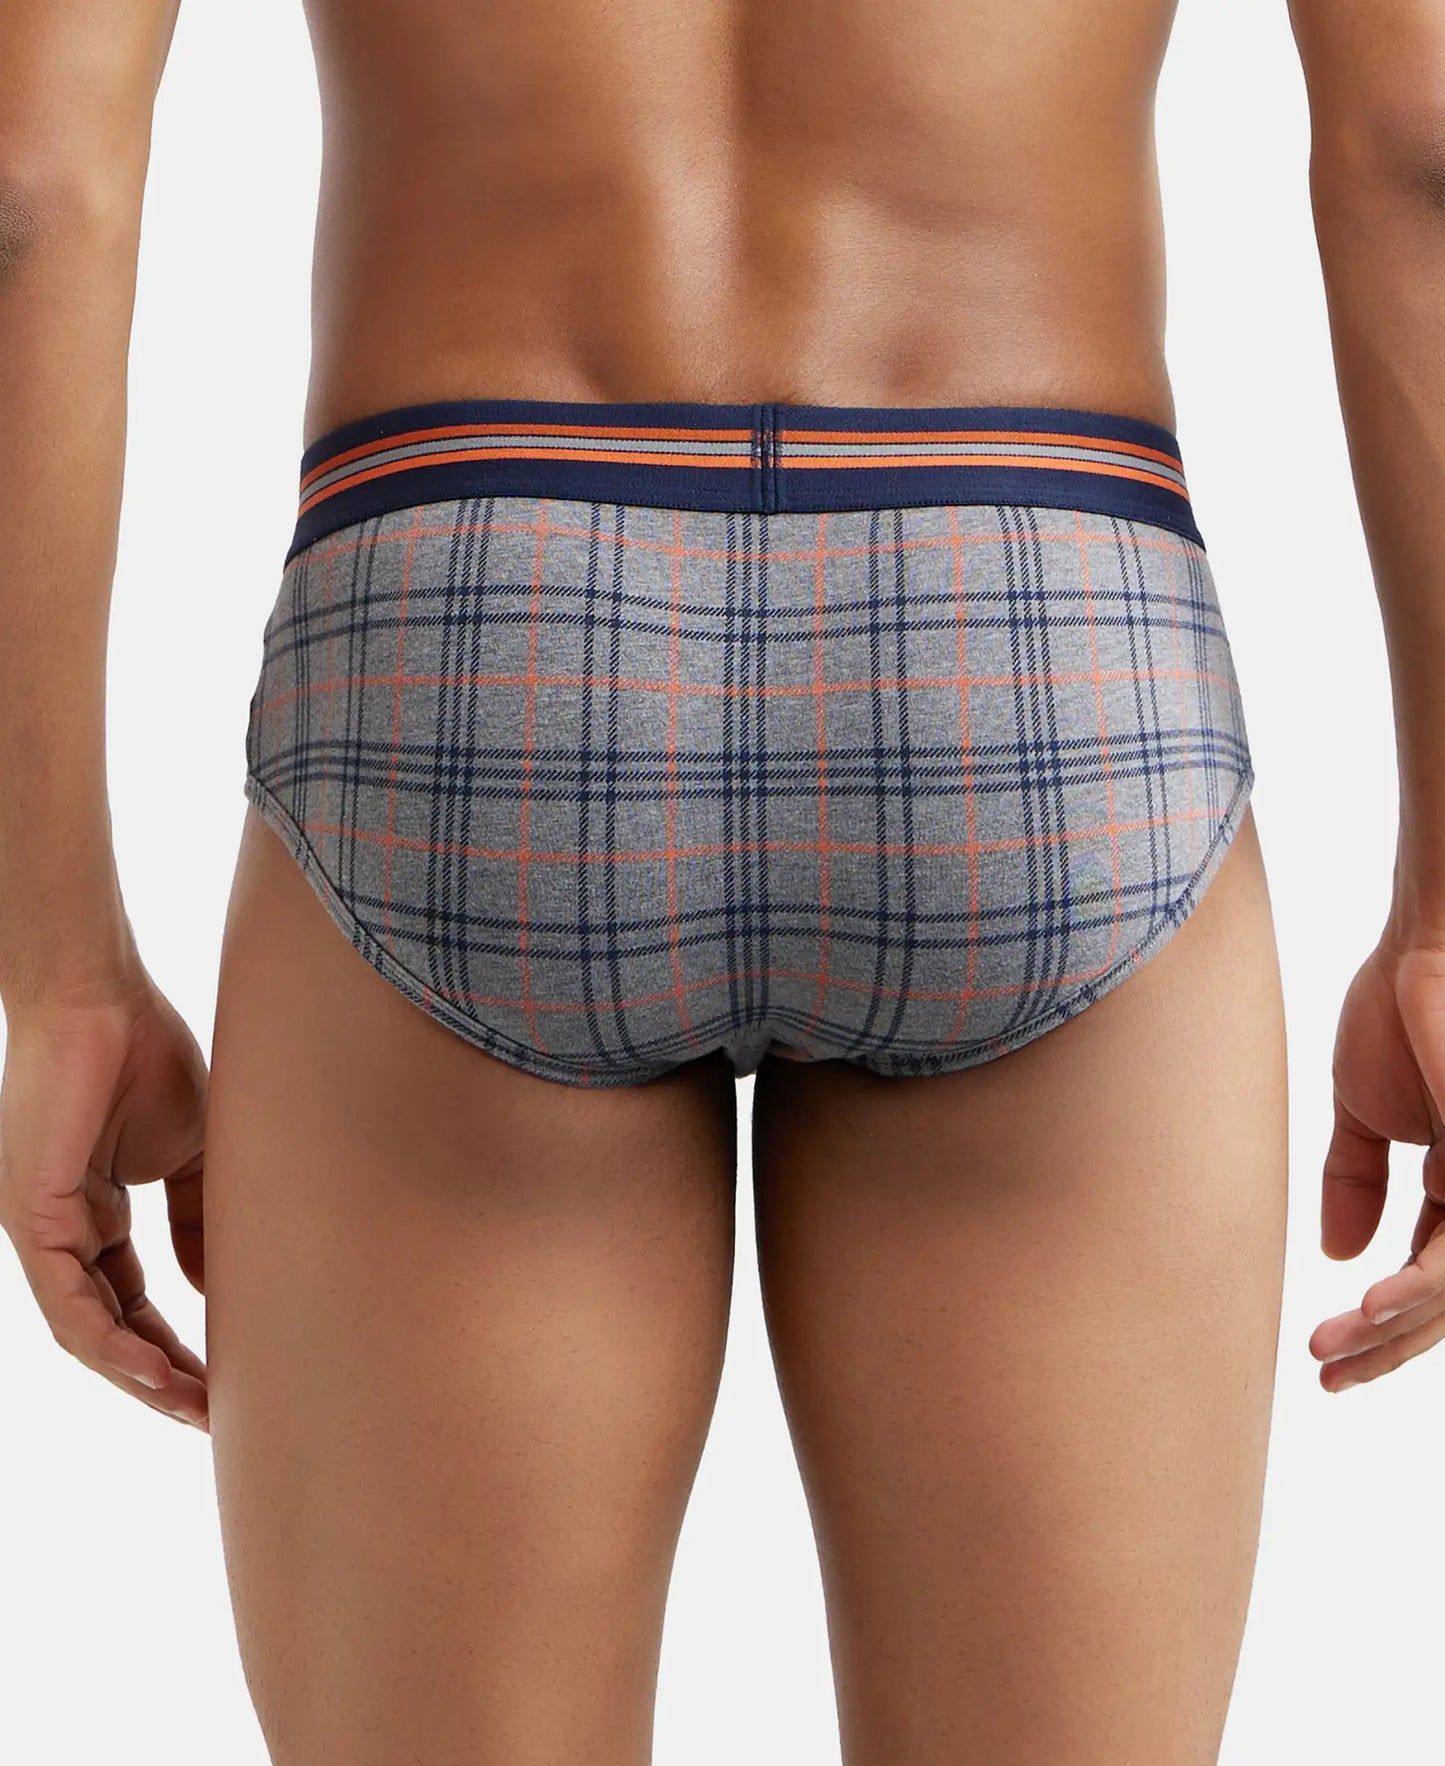 Super Combed Cotton Elastane Printed Brief with Ultrasoft Waistband - Navy Print-7